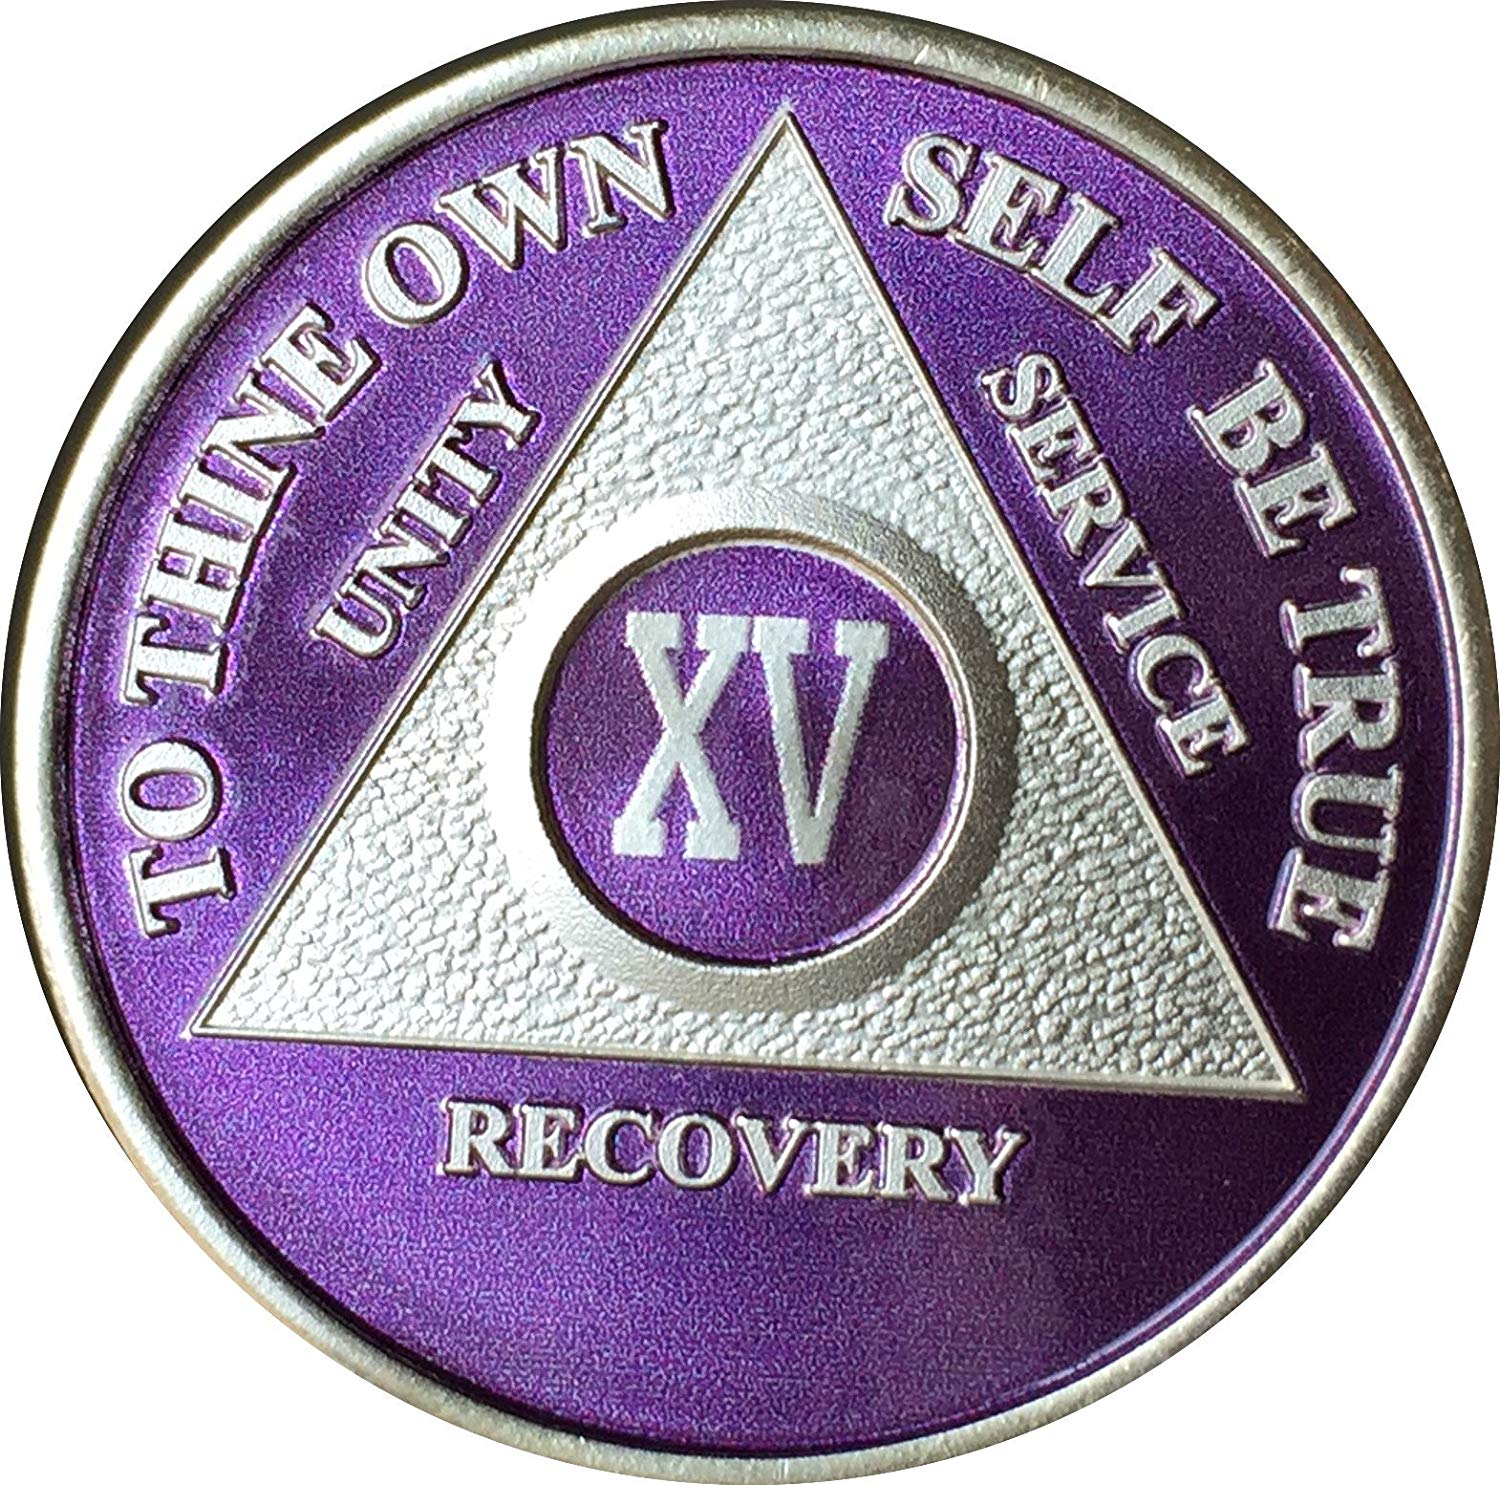 Unity Service Recovery Logo - Amazon.com: wendells 15 Year AA Medallion Purple Silver Plated ...